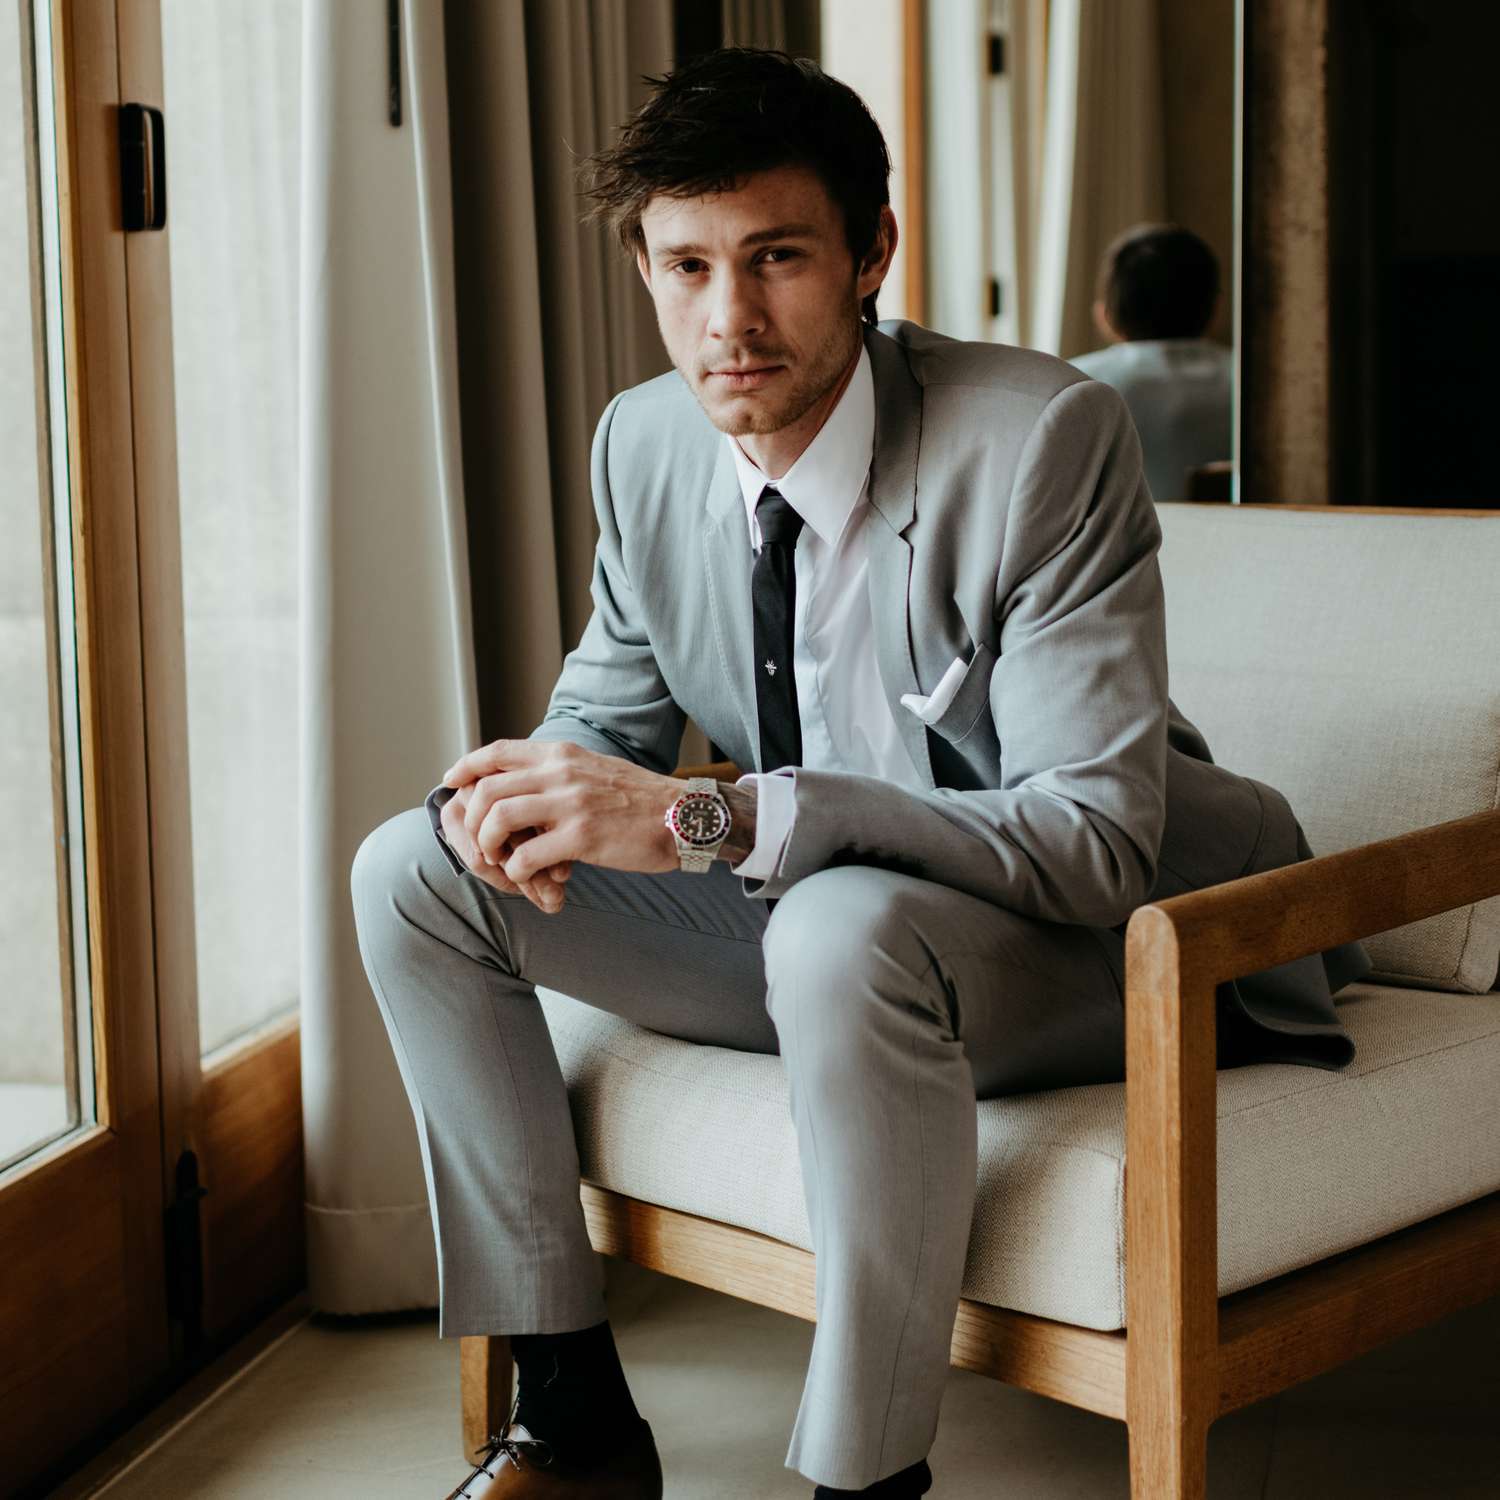 Person wearing a gray suit and black tie sitting on a chair